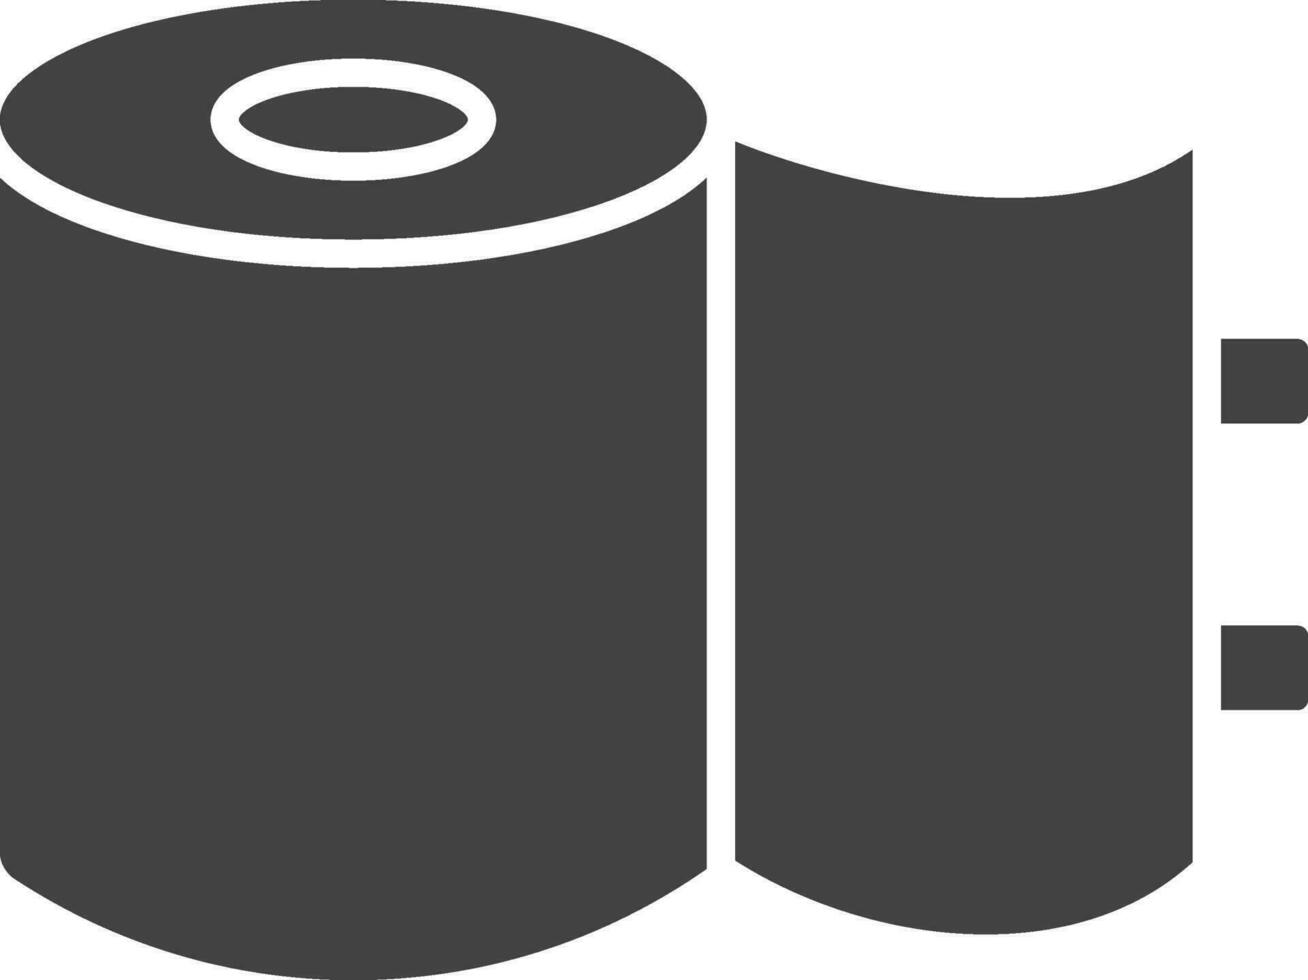 Bandage icon vector image. Suitable for mobile apps, web apps and print media.